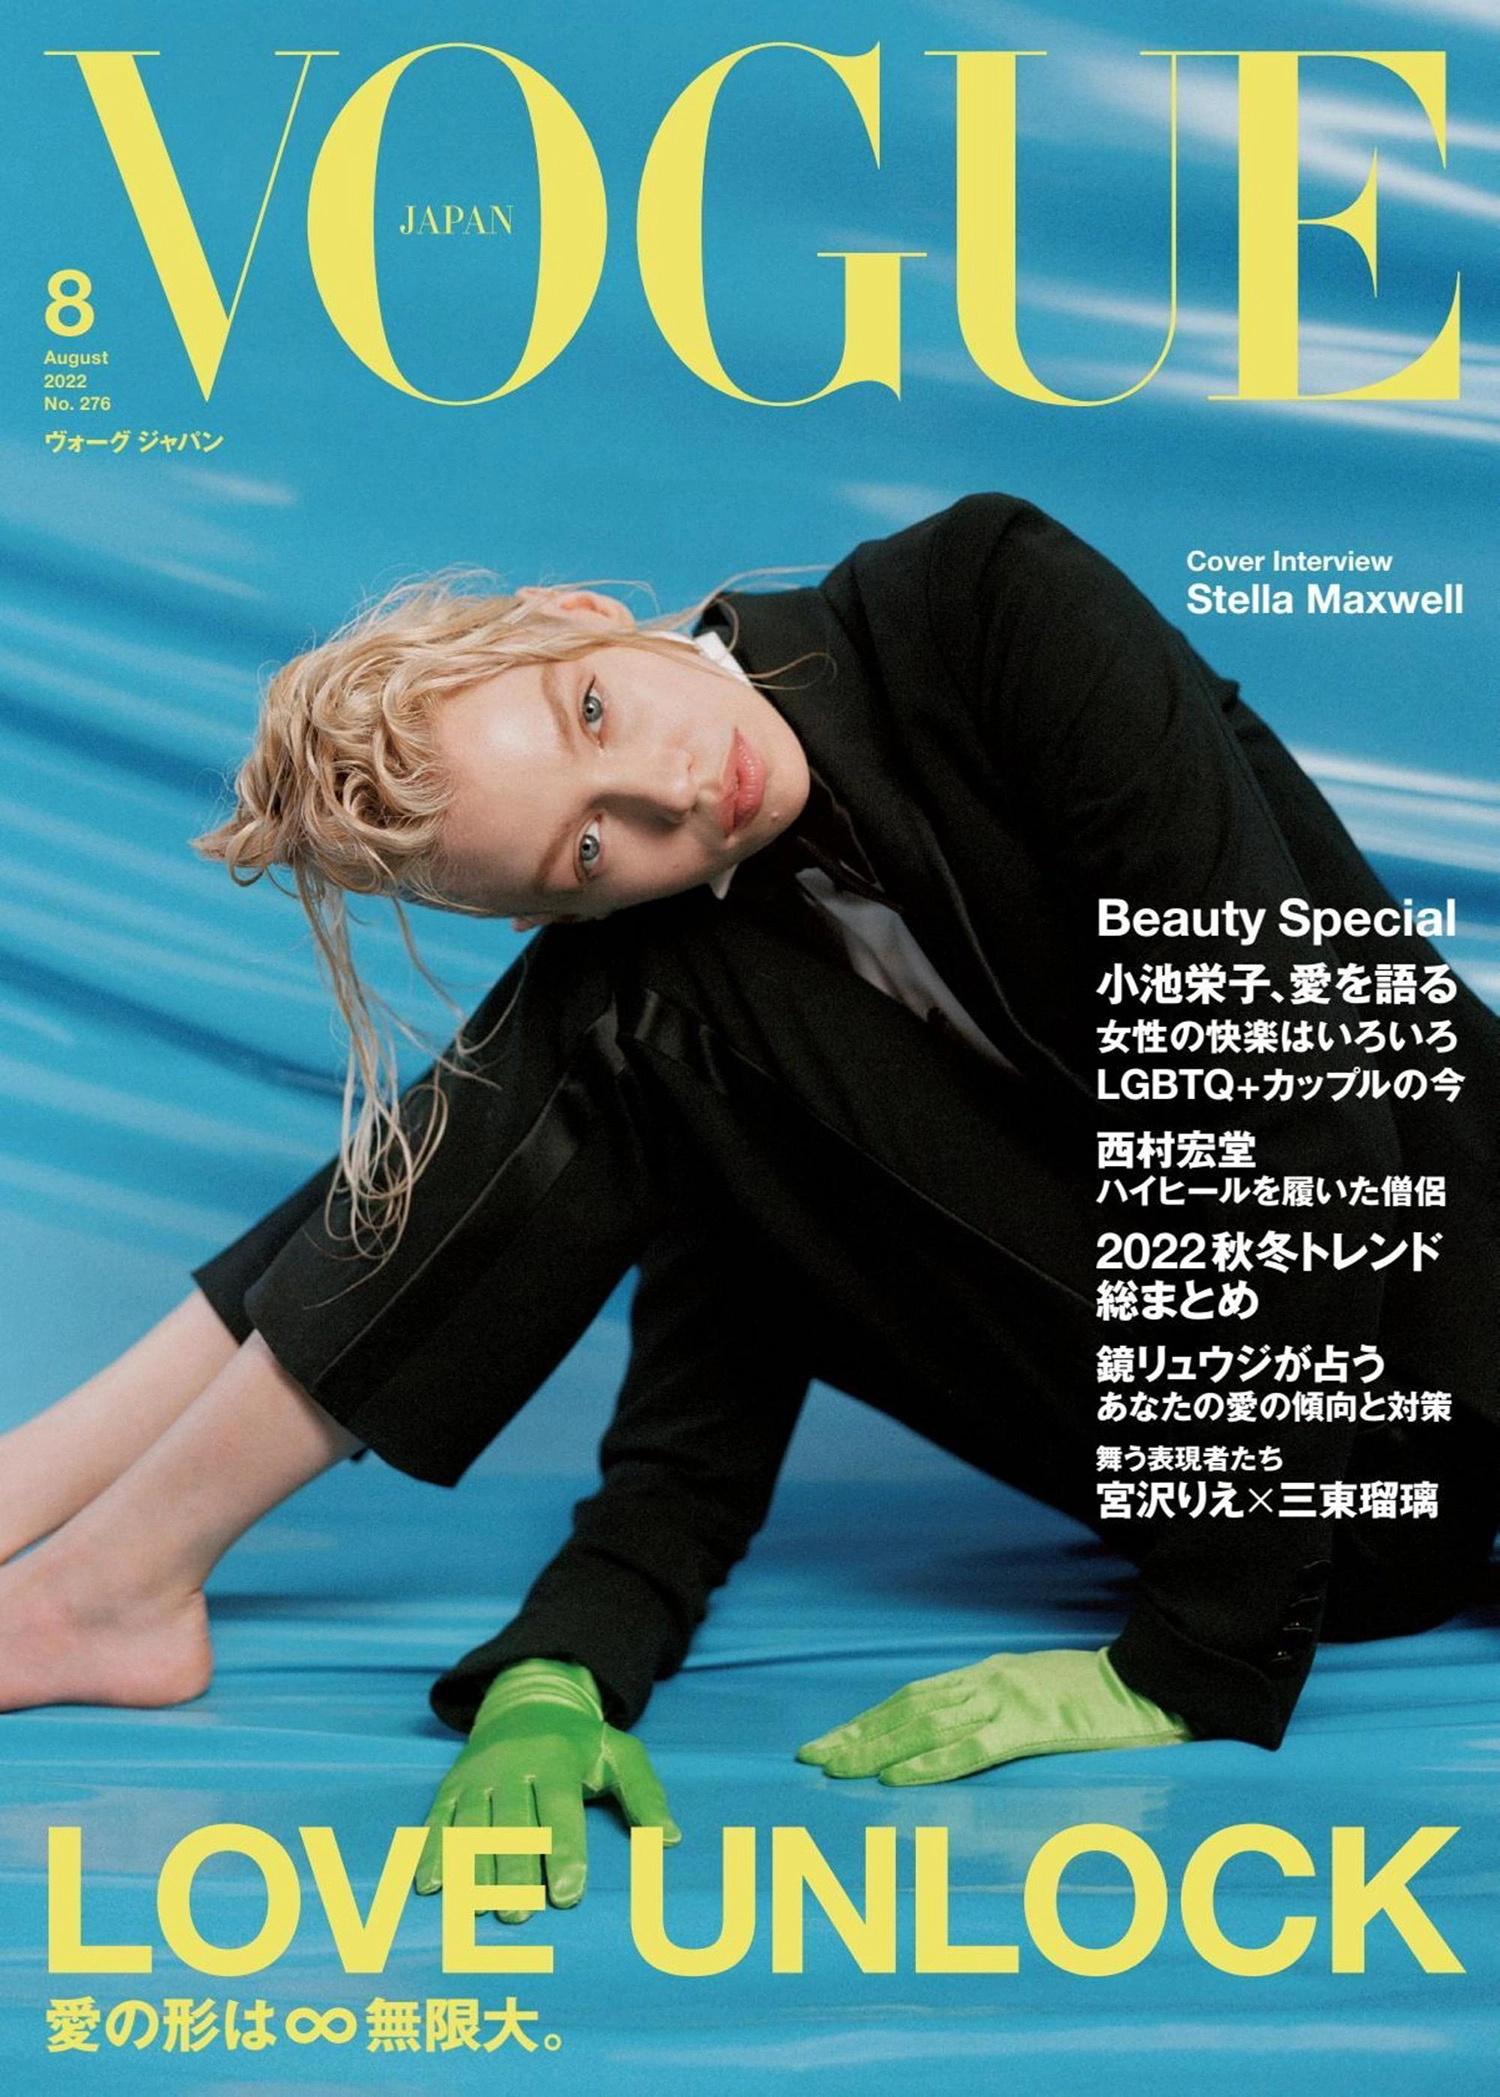 Stella Maxwell covers Vogue Japan August 2022 by Tanya and Zhenya Posternak